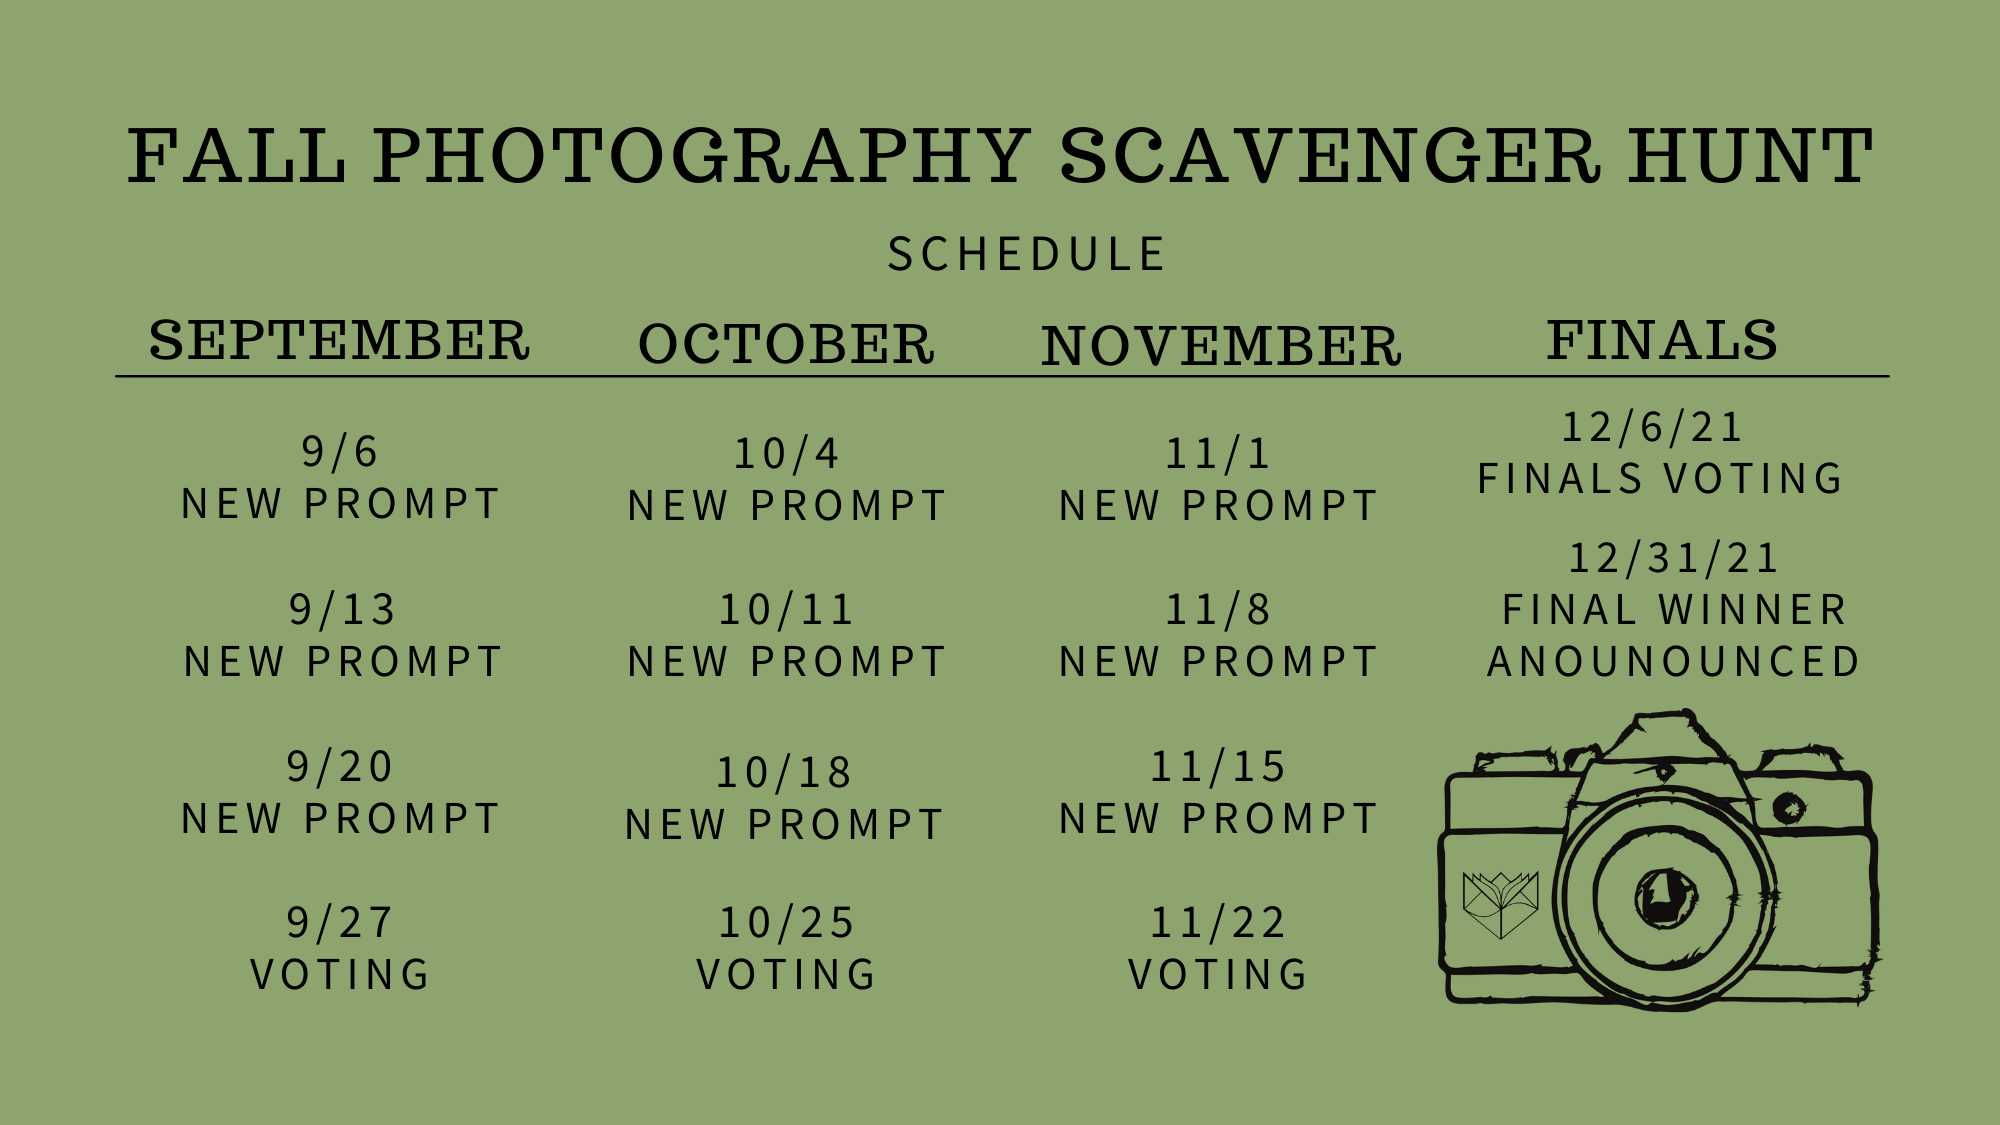 Fall Photography Scavenger Hunt schedule3 1